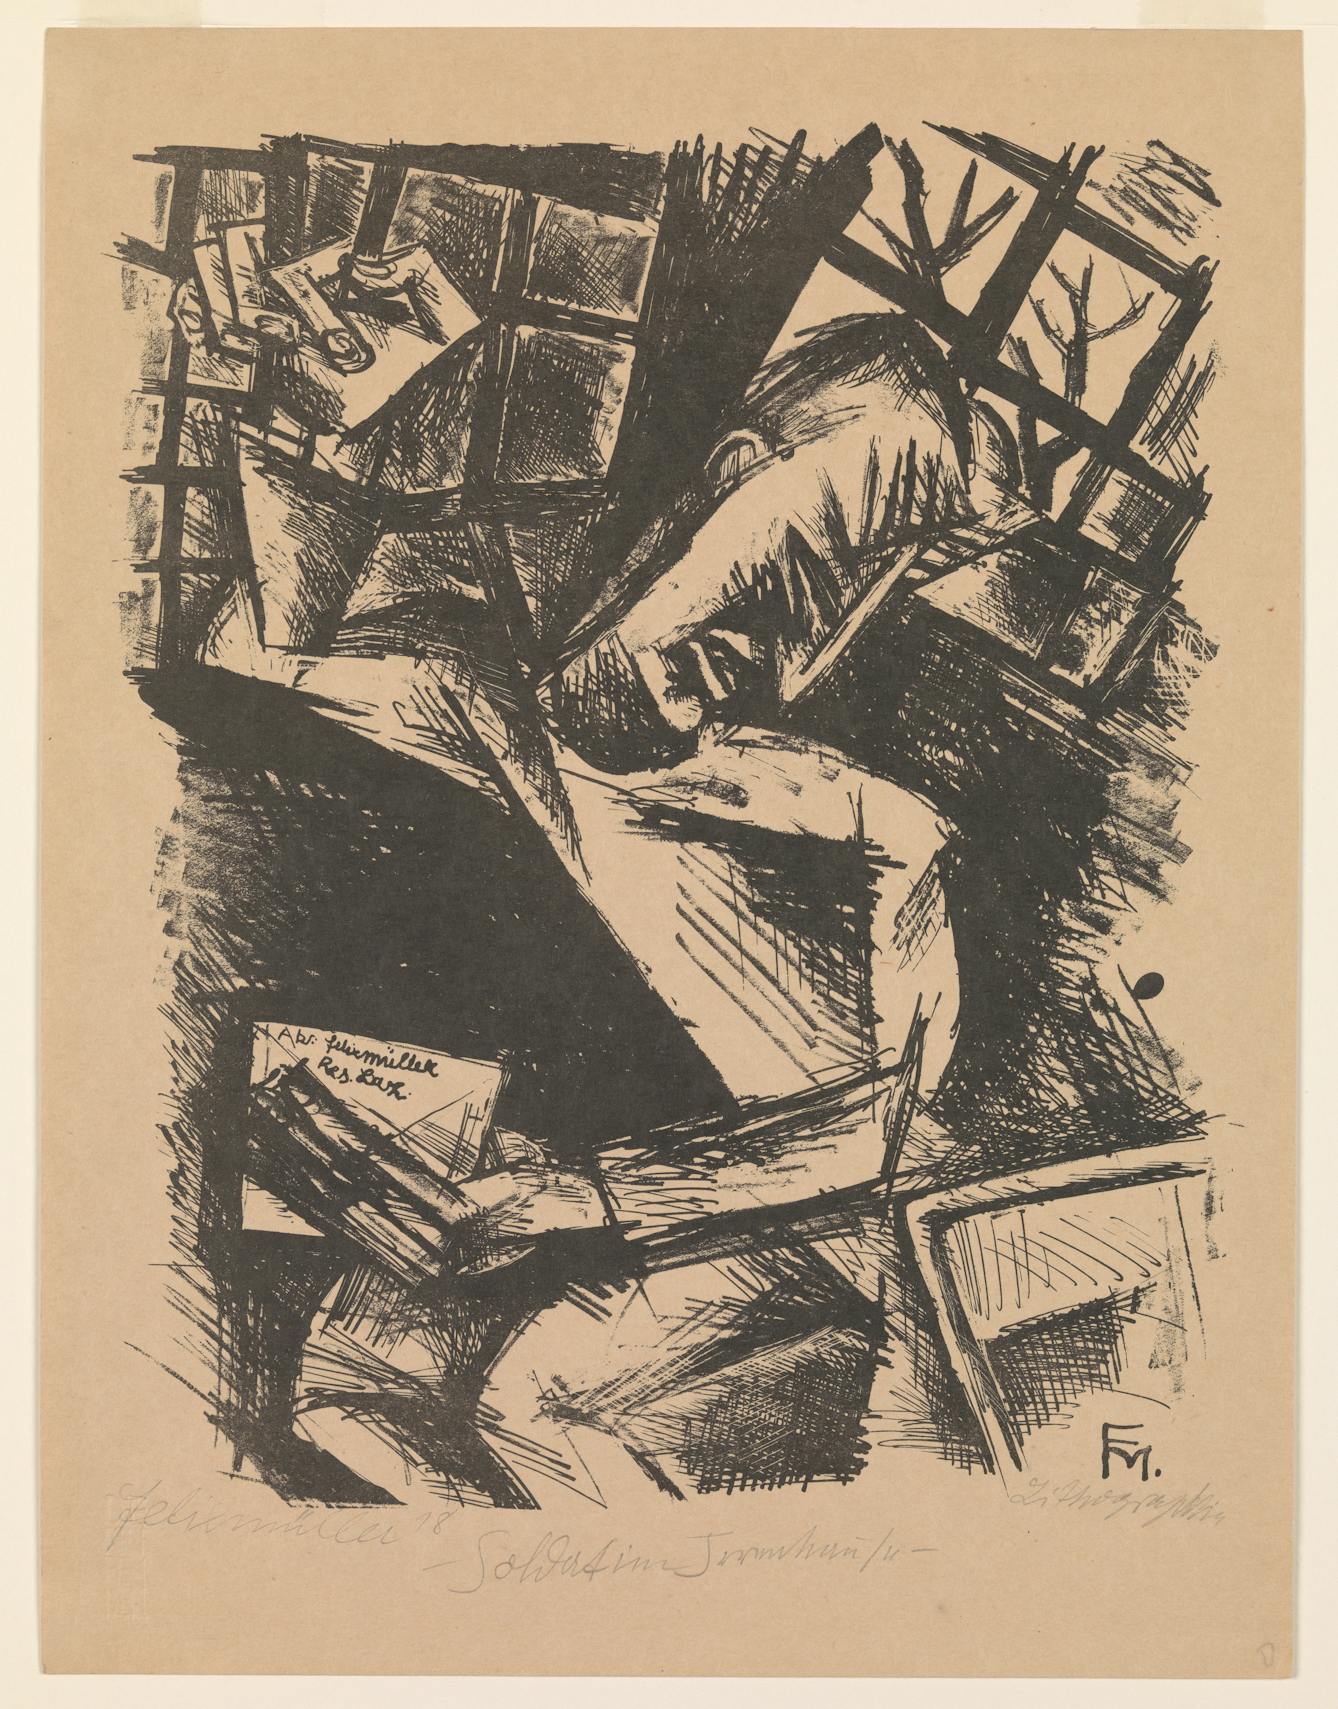 Photograph of a lithograph by Conrad Felixmüller in 1918. It shows a man seated in a cell, holding a letter in one hand and clasping the window bars with the clenched fingers of his other hand.